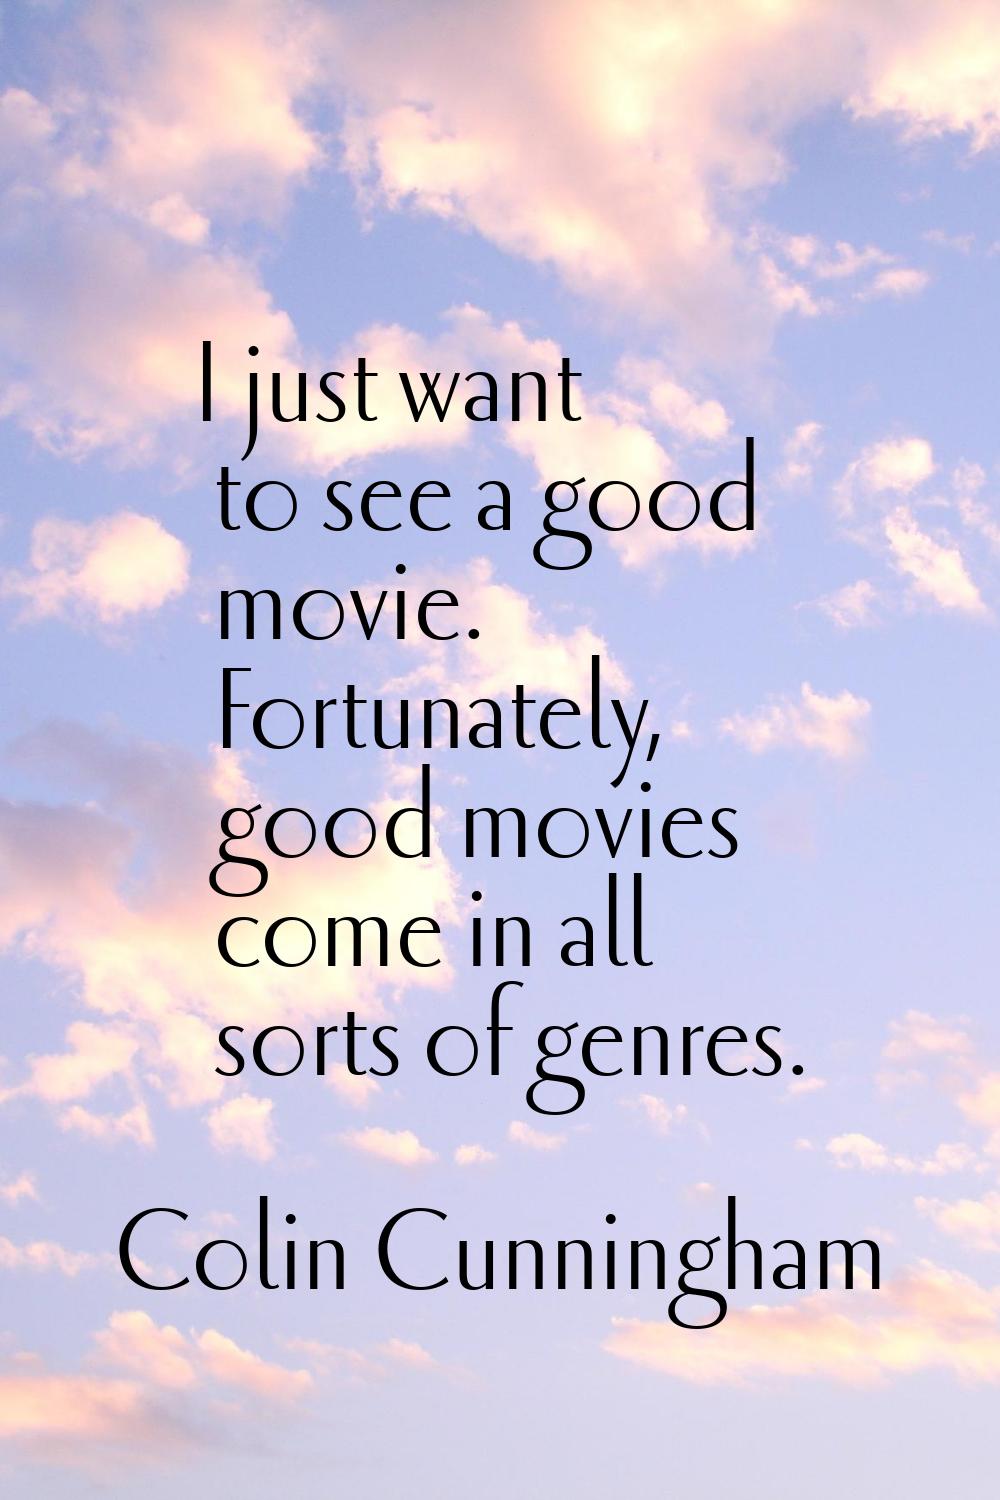 I just want to see a good movie. Fortunately, good movies come in all sorts of genres.